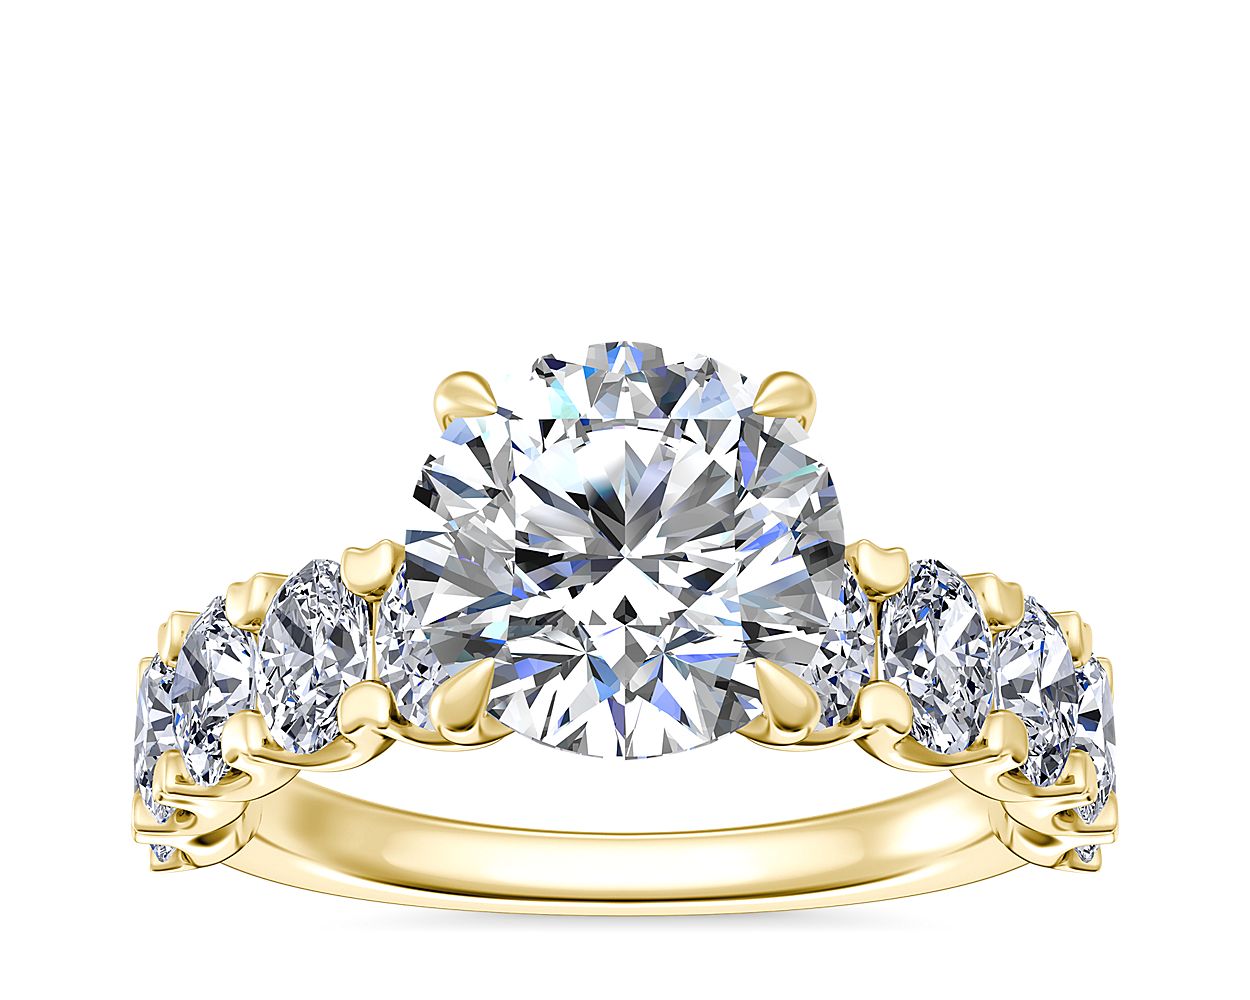 Oval-Cut Diamond Engagement Ring in 14k Yellow Gold